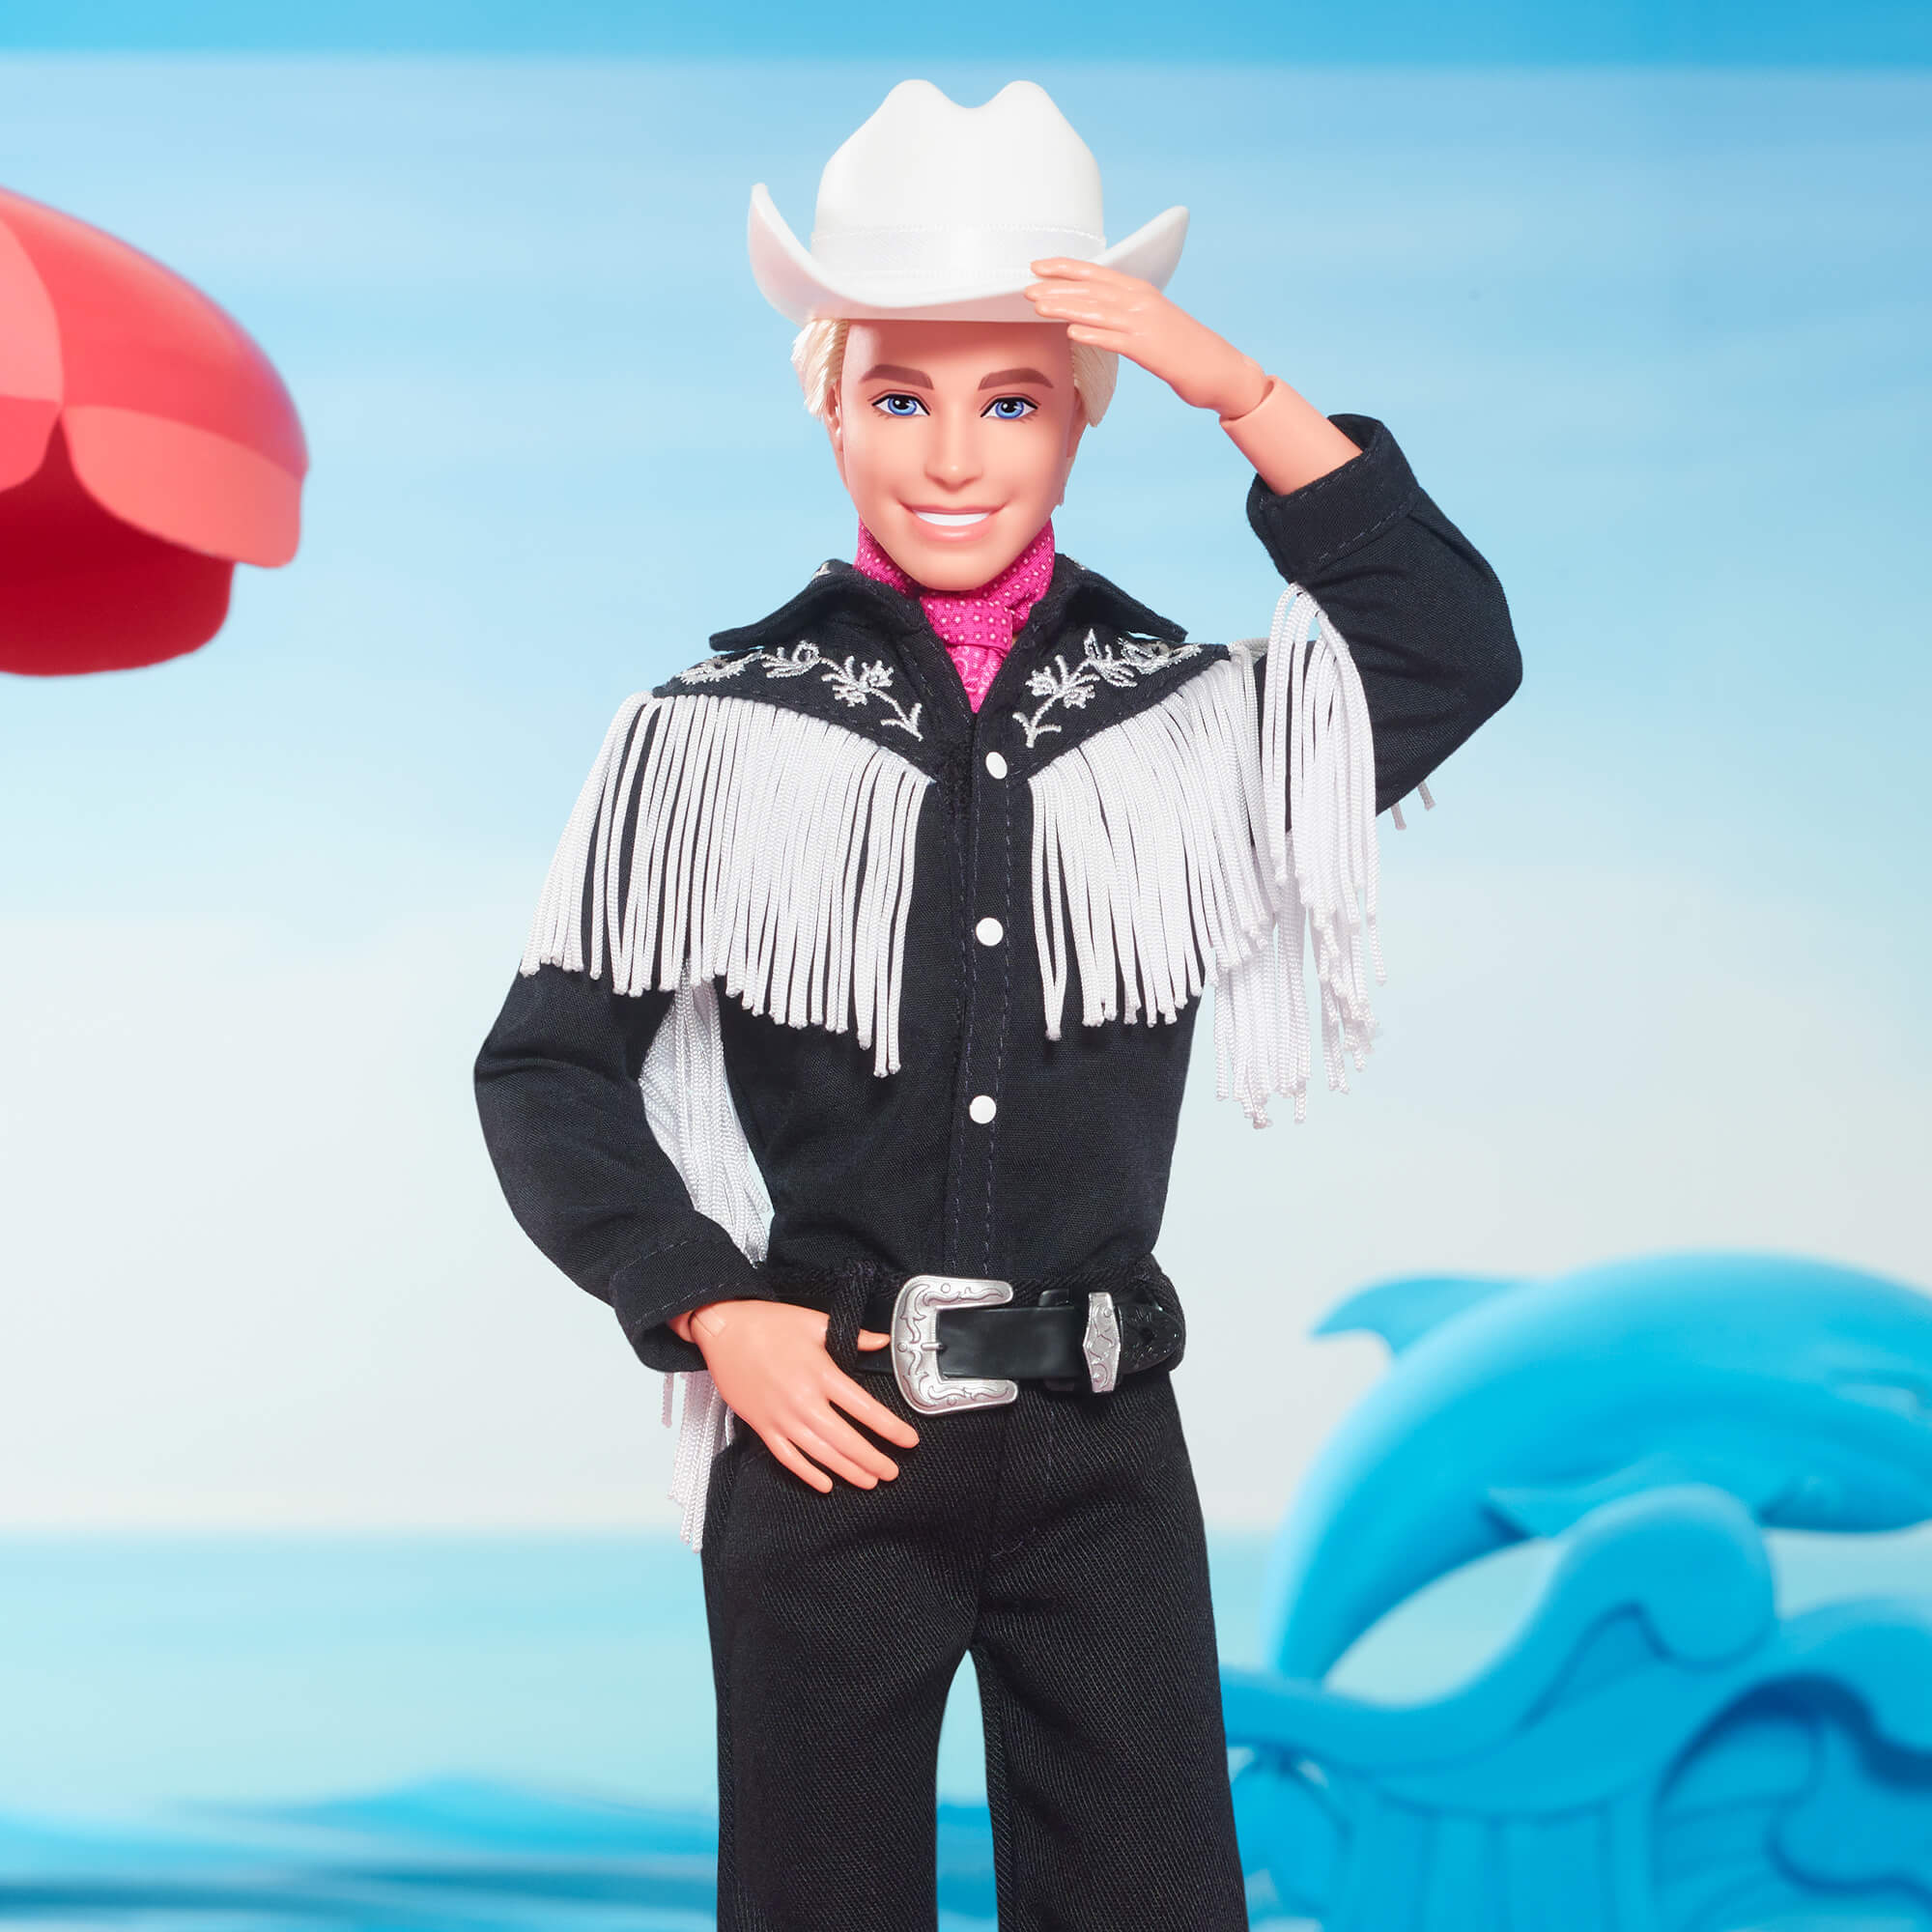 Barbie The Movie Collectible Ken Doll Wearing Black and White Western  Outfit